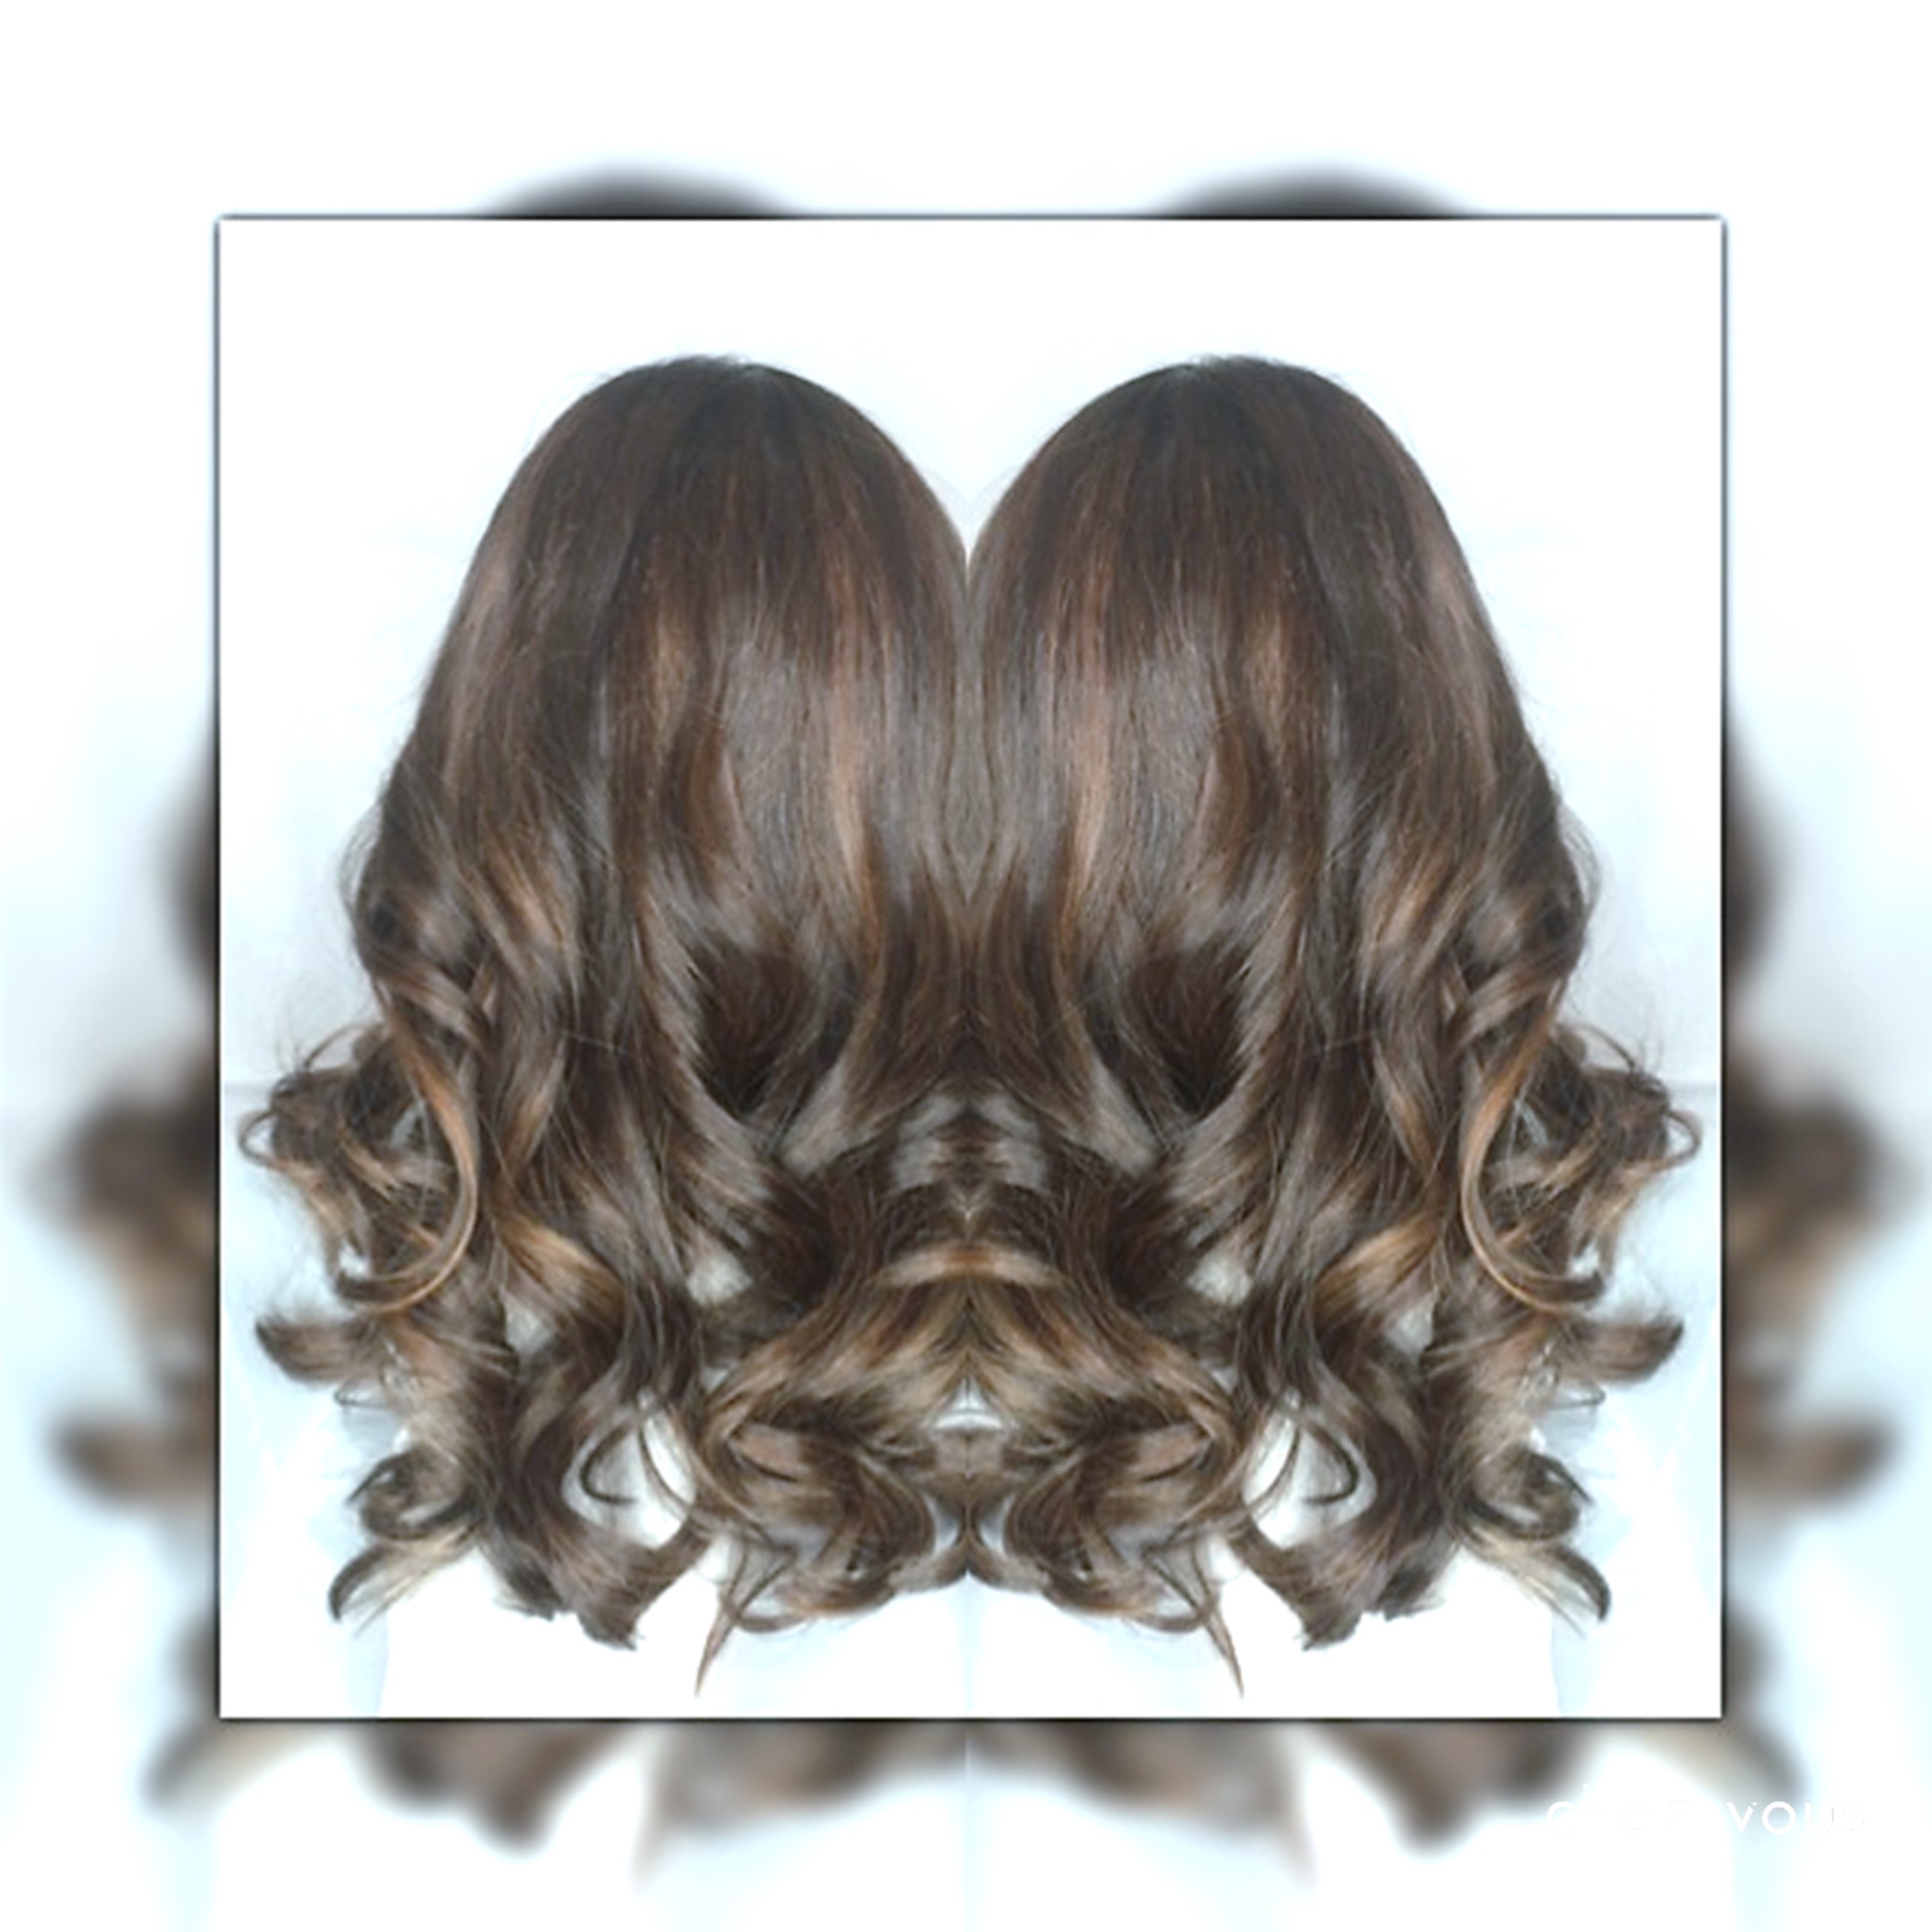 Done by Associate Salon Director of Chez Vous: Shawn Chia | Design: Melted Rich Woodsy Brown Balayage